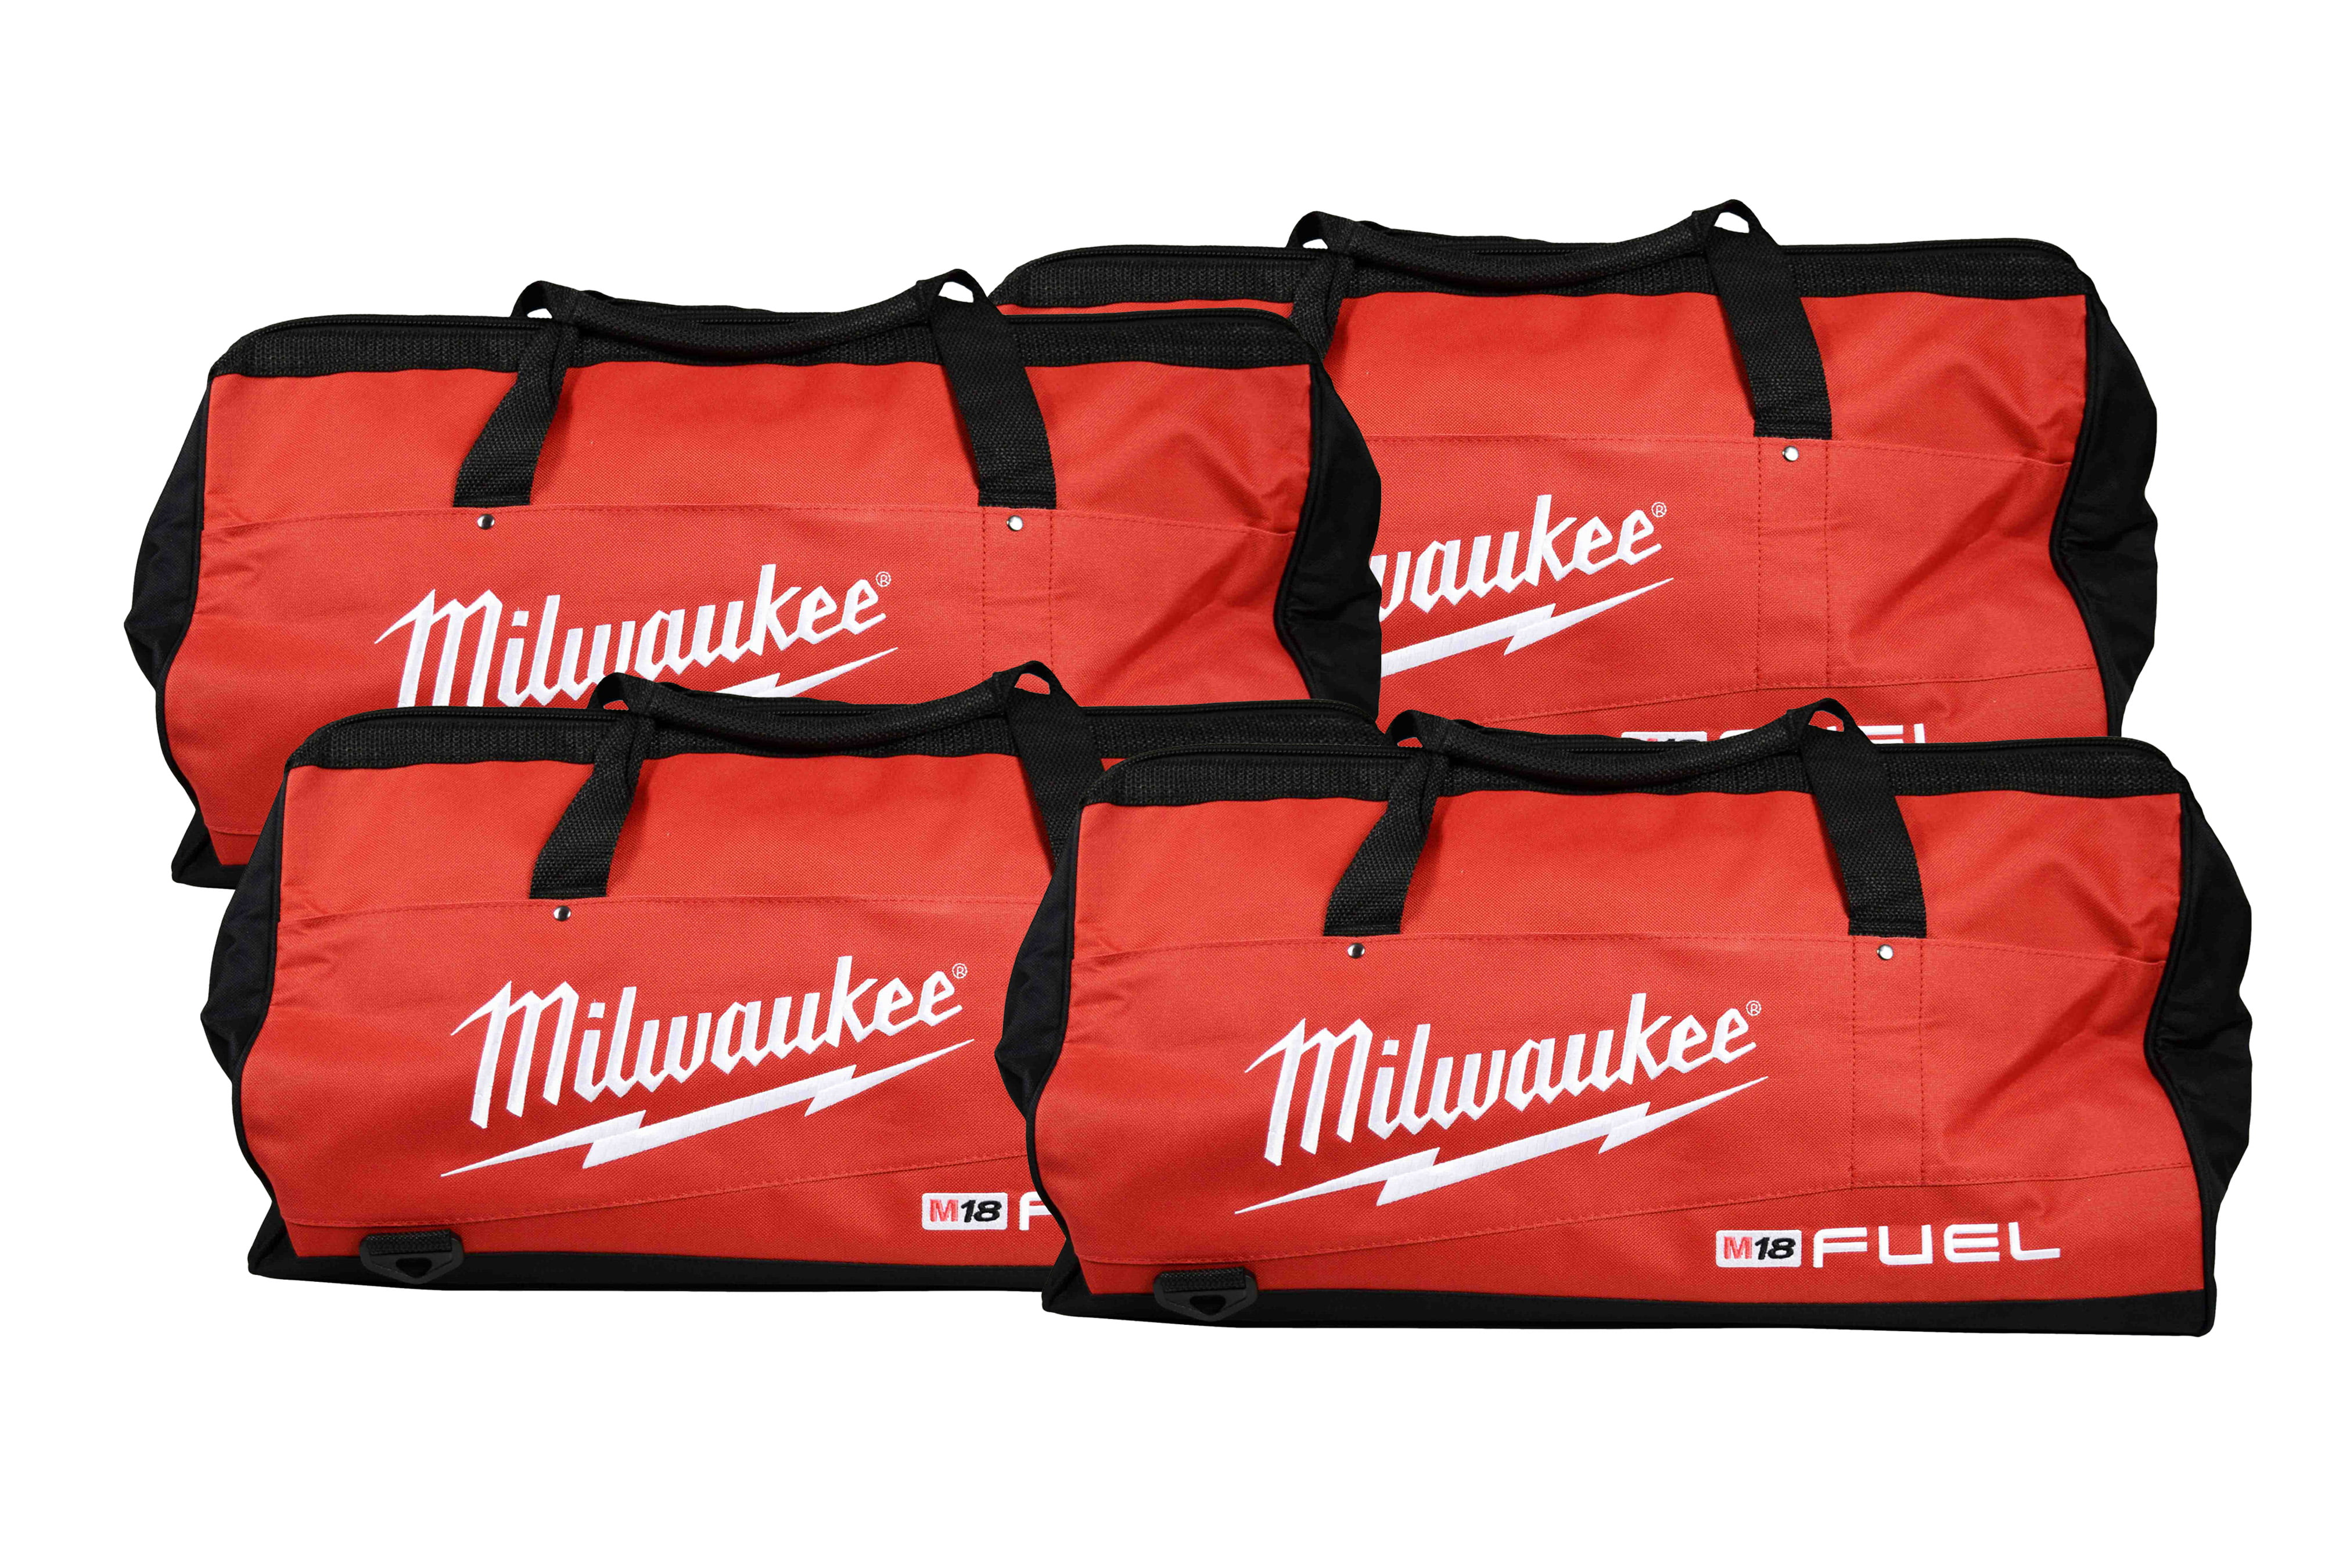 Water Resistant 600 325mm - Small Milwaukee Contractor's Heavy Duty Tool Bag